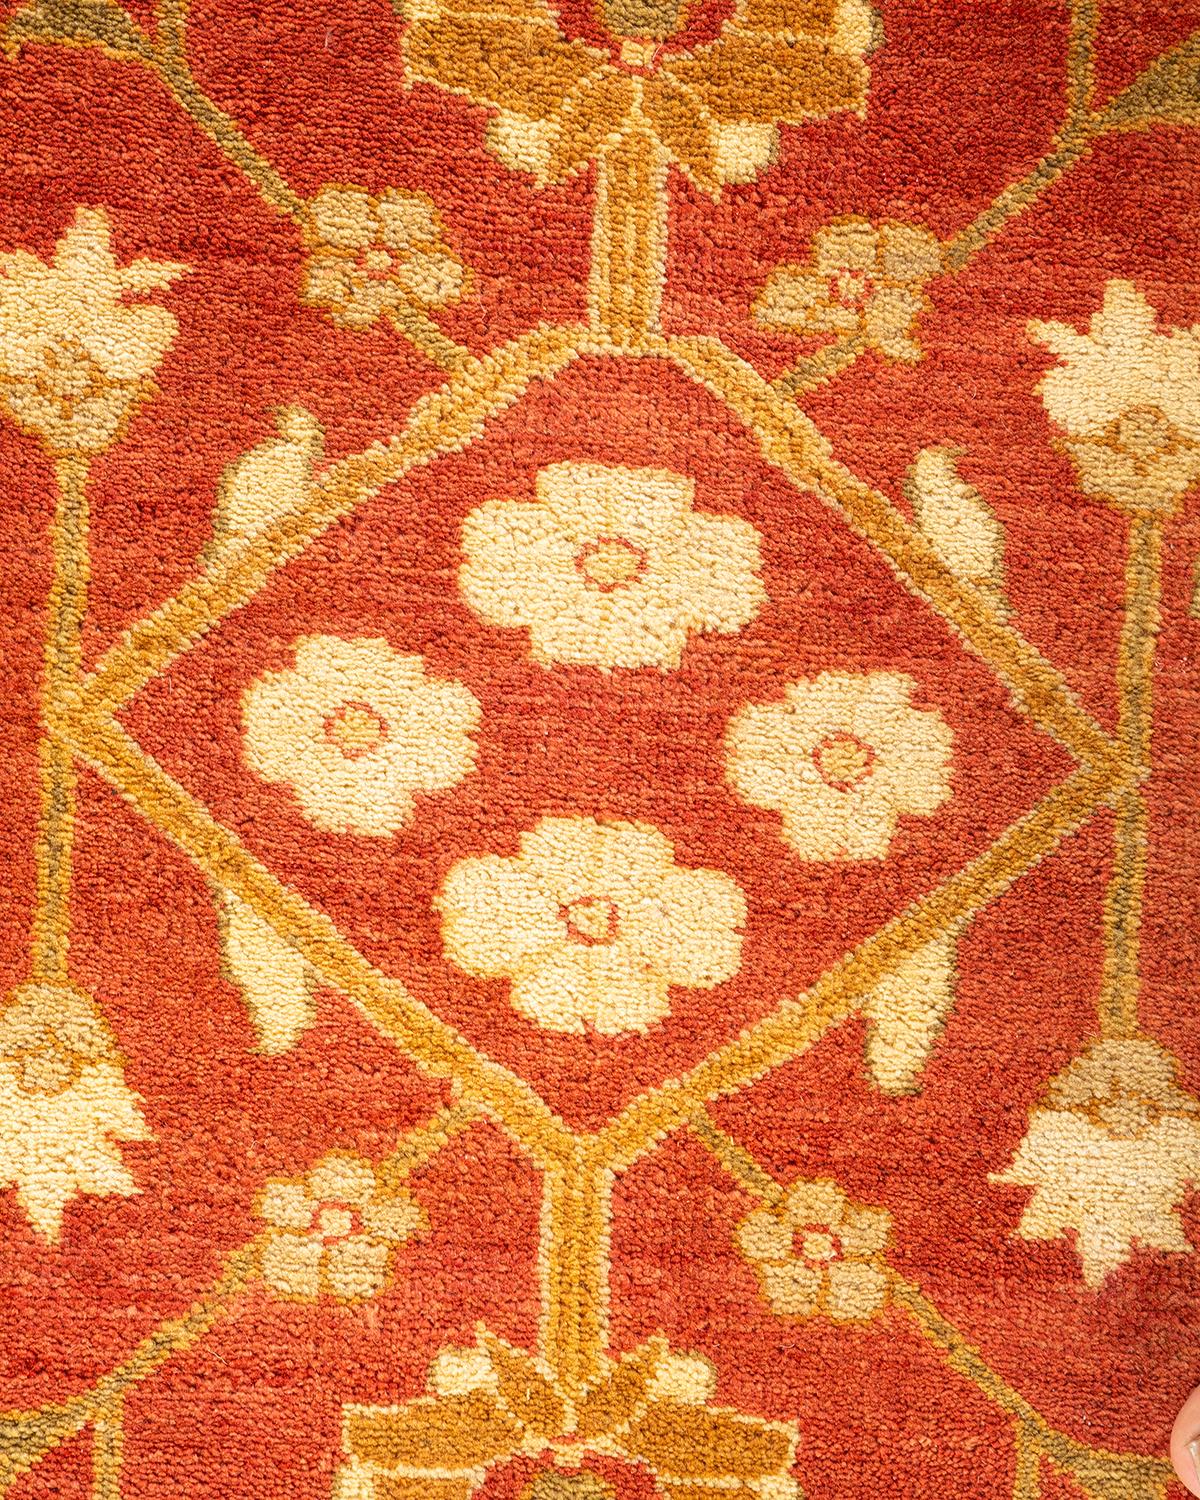 Pakistani One-Of-A-Kind Hand Knotted Floral Eclectic Orange Area Rug 11' 10